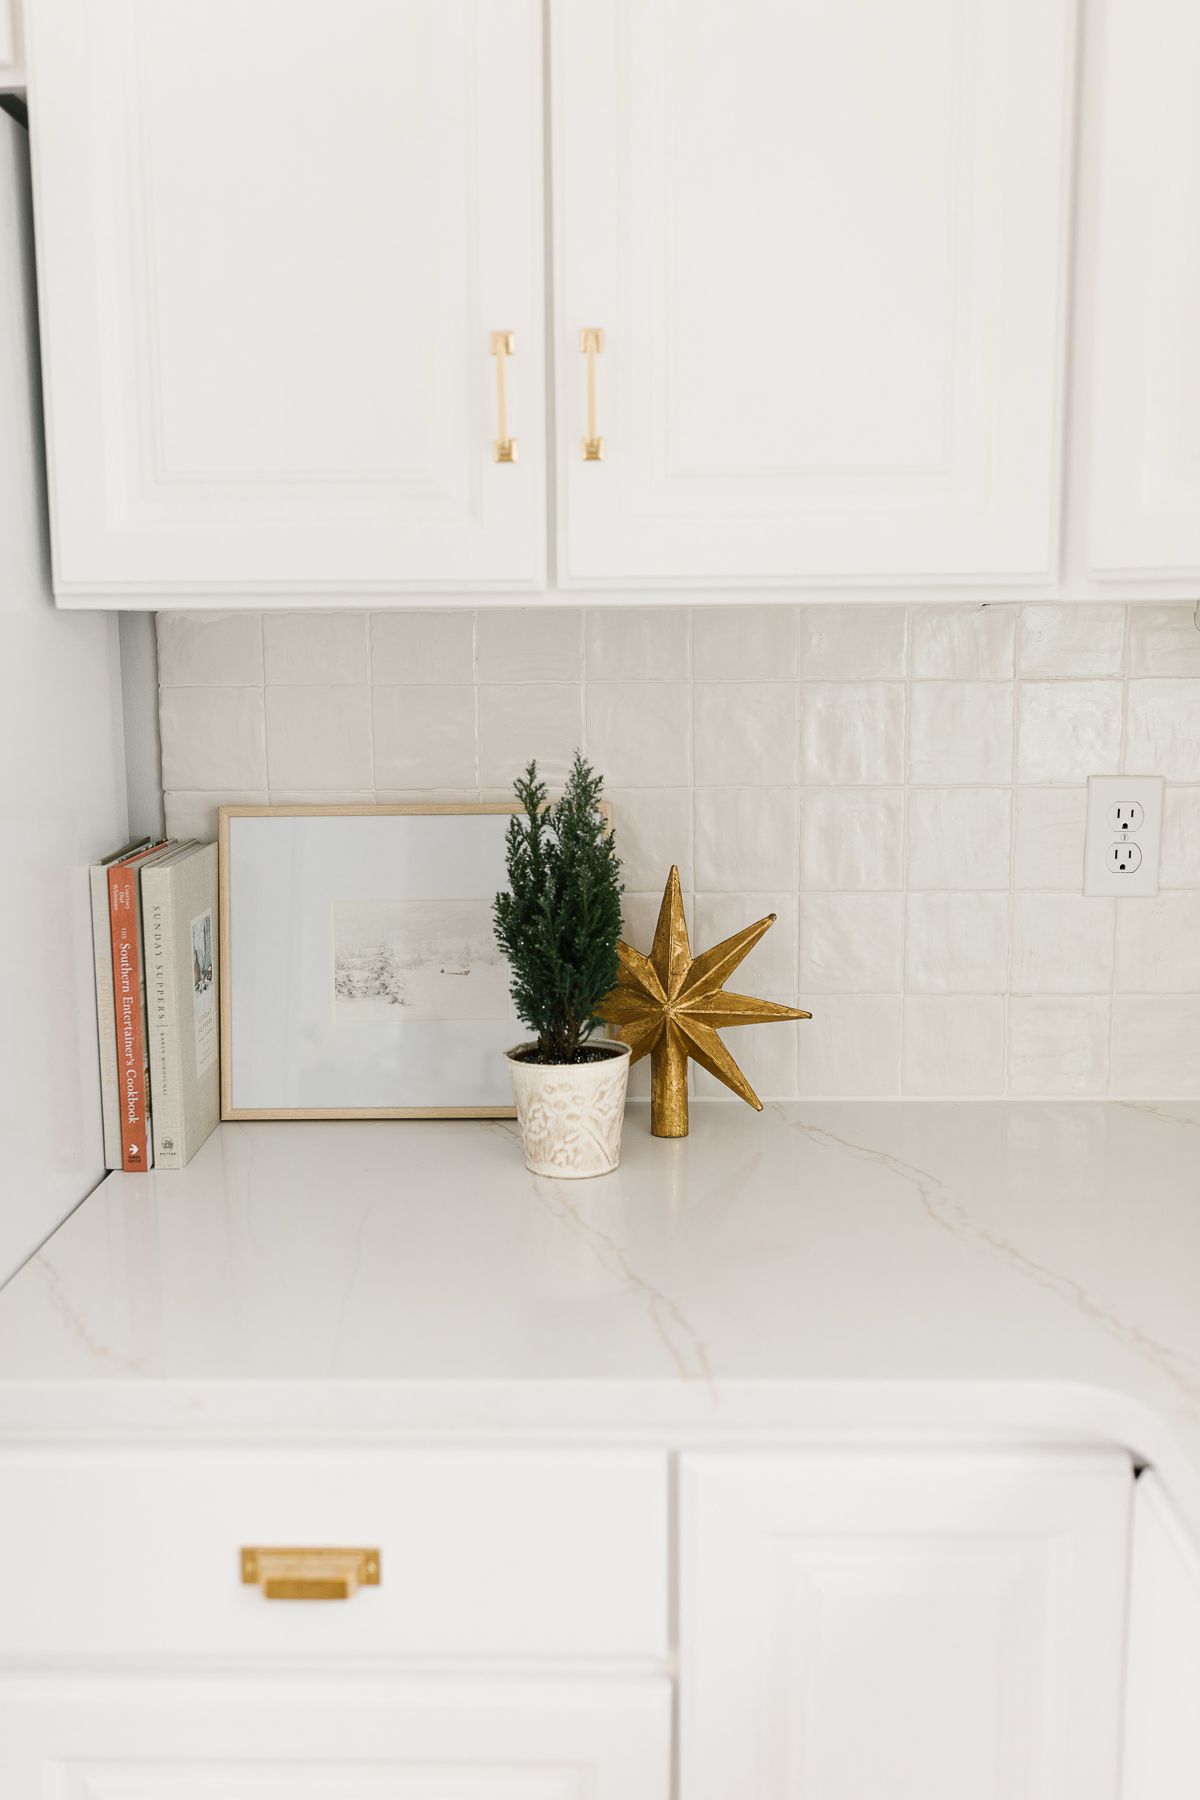 White kitchen cabinets with a white tile backsplash, with a white polyblend grout color